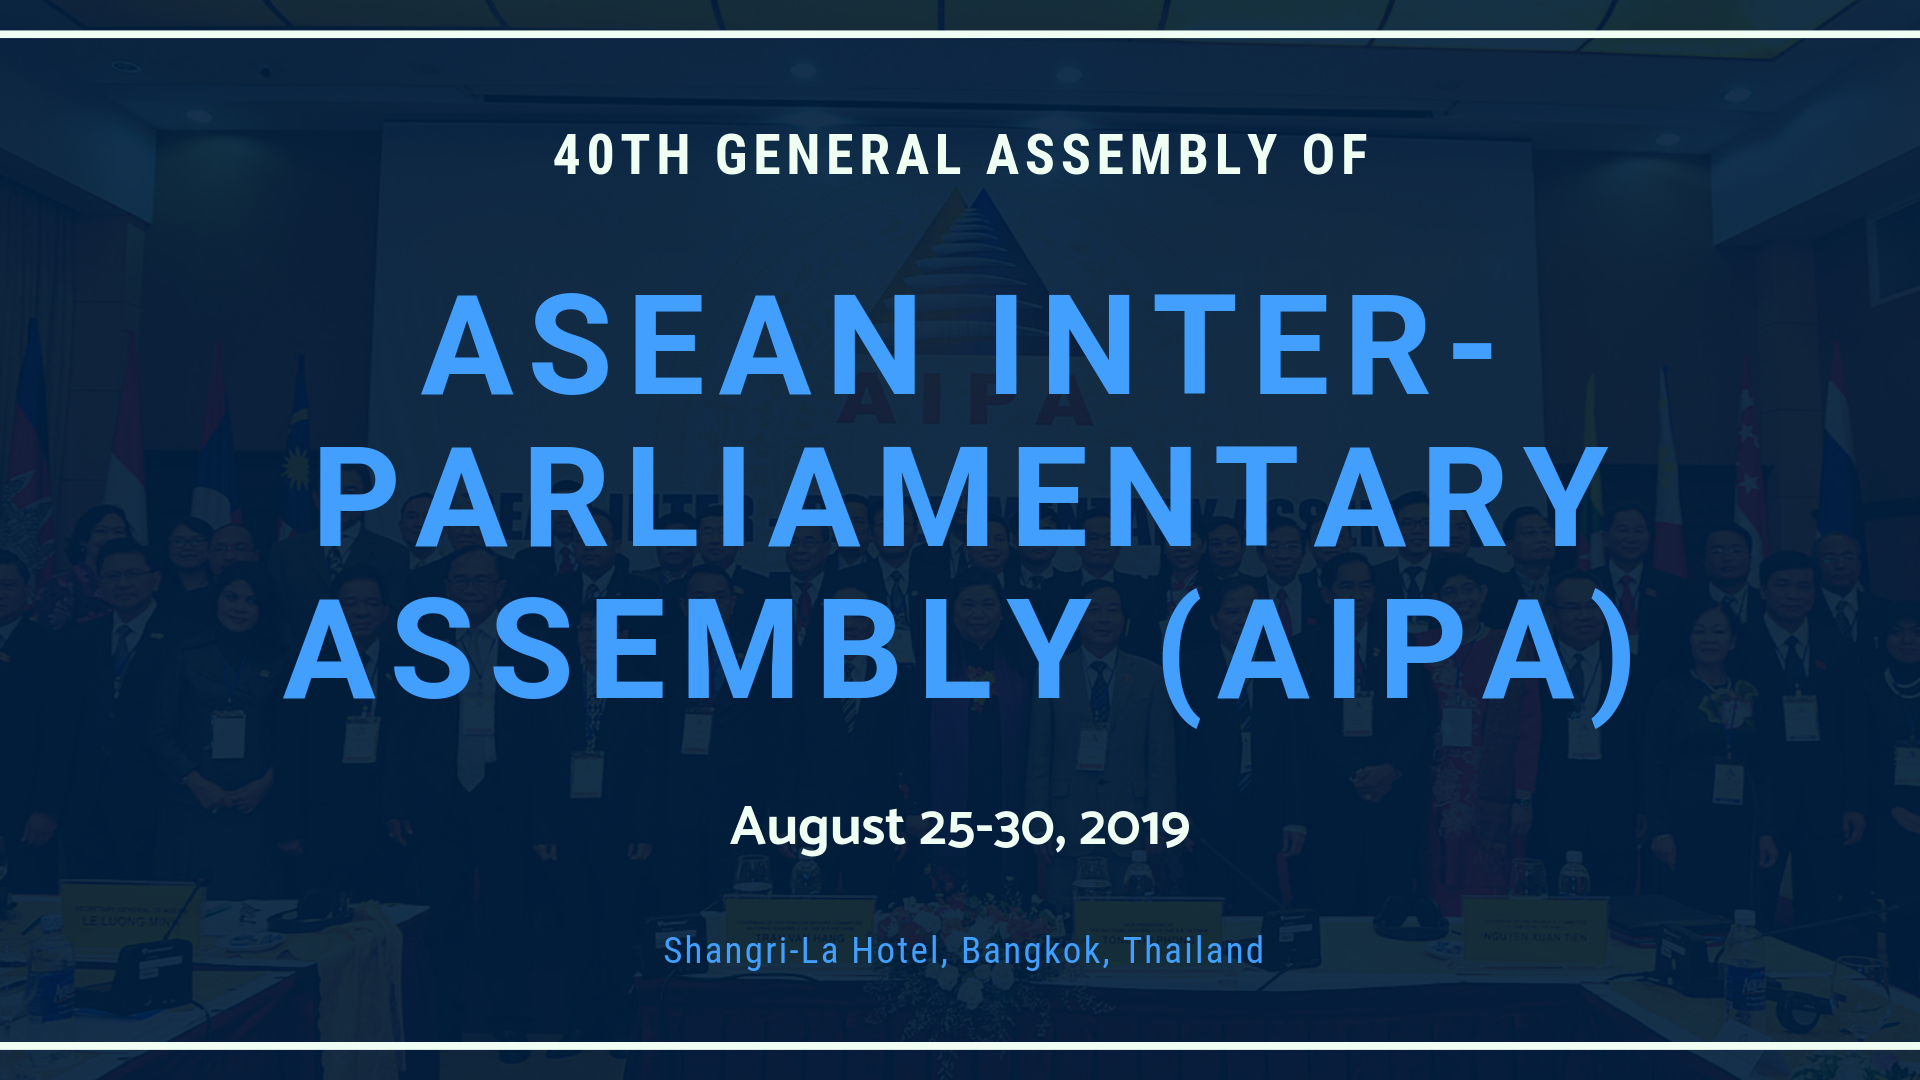 40th General Assembly of the Asian Inter-Parliamentary Assembly (AIPA)